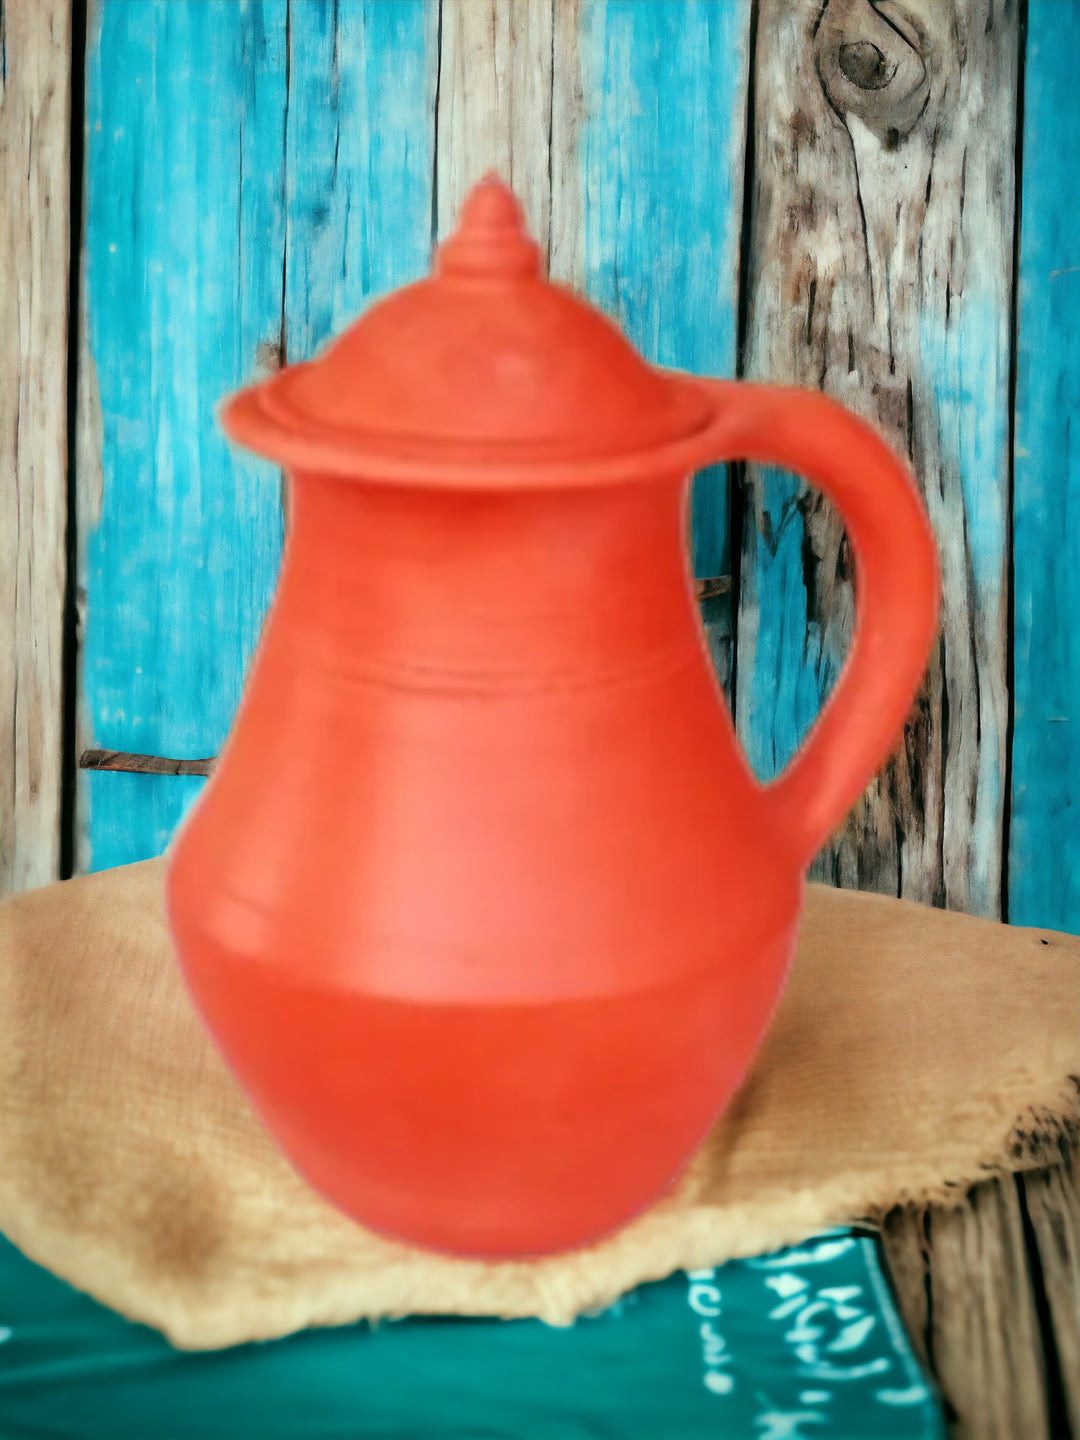 Handmade & Eco-Friendly Earthen (Clay/ Terracotta) Jug with Clay Lid